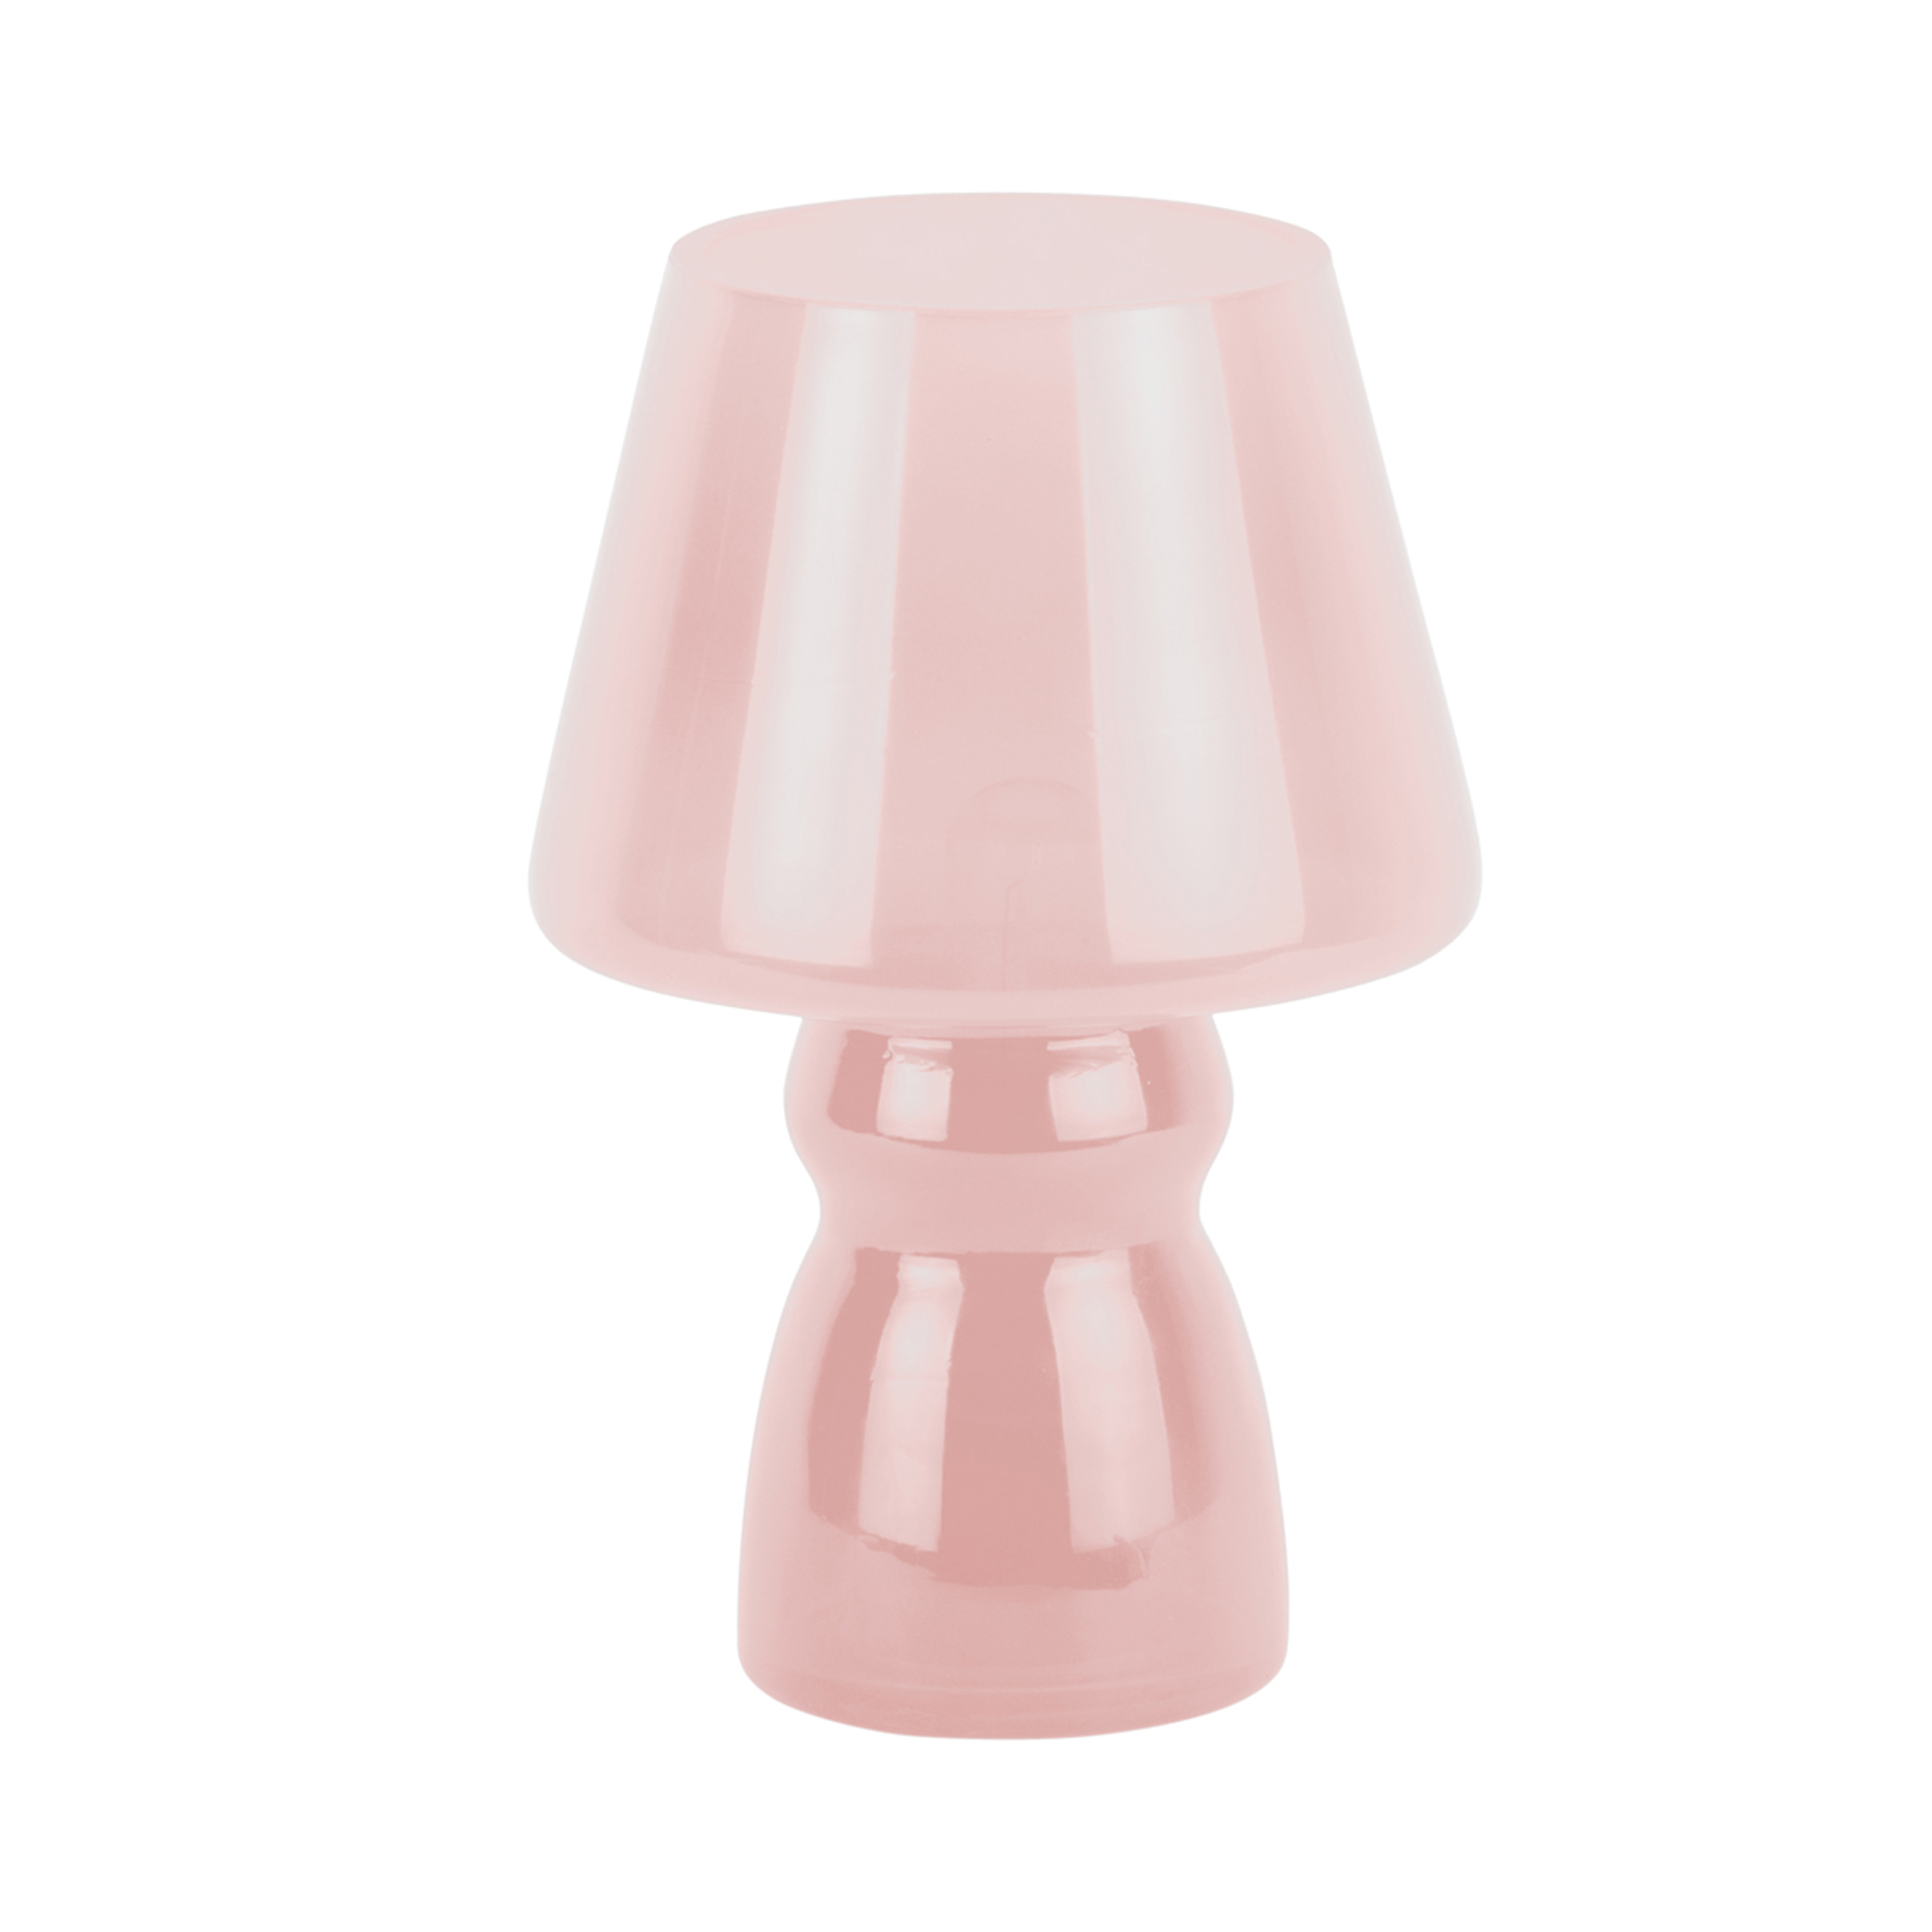 letimov-classic-glass-portable-table-lamp-soft-pink